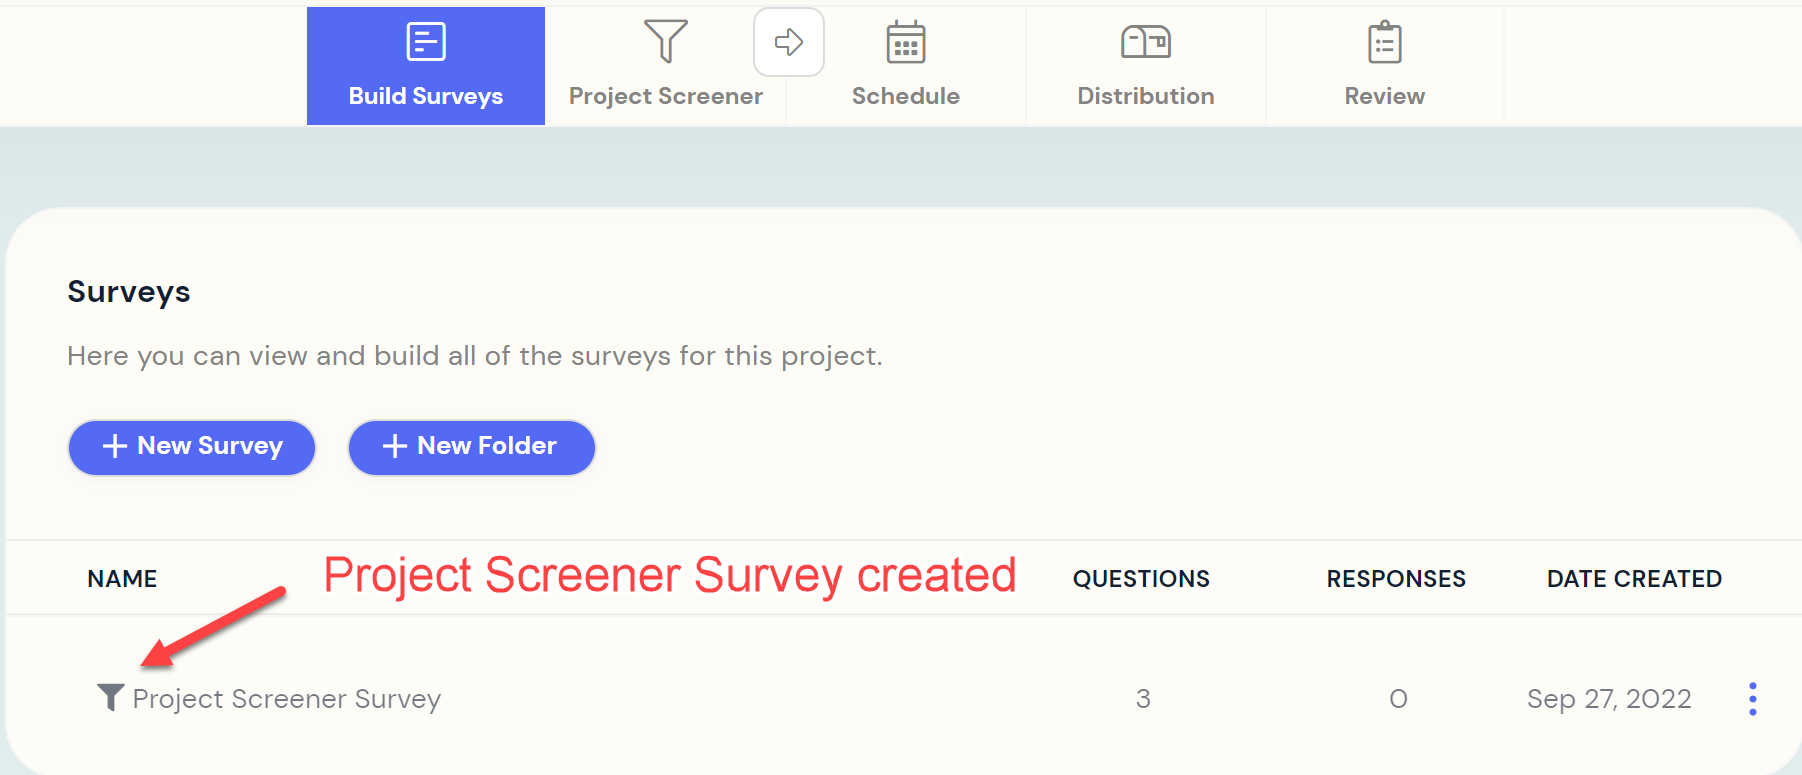 Project Screener Survey created